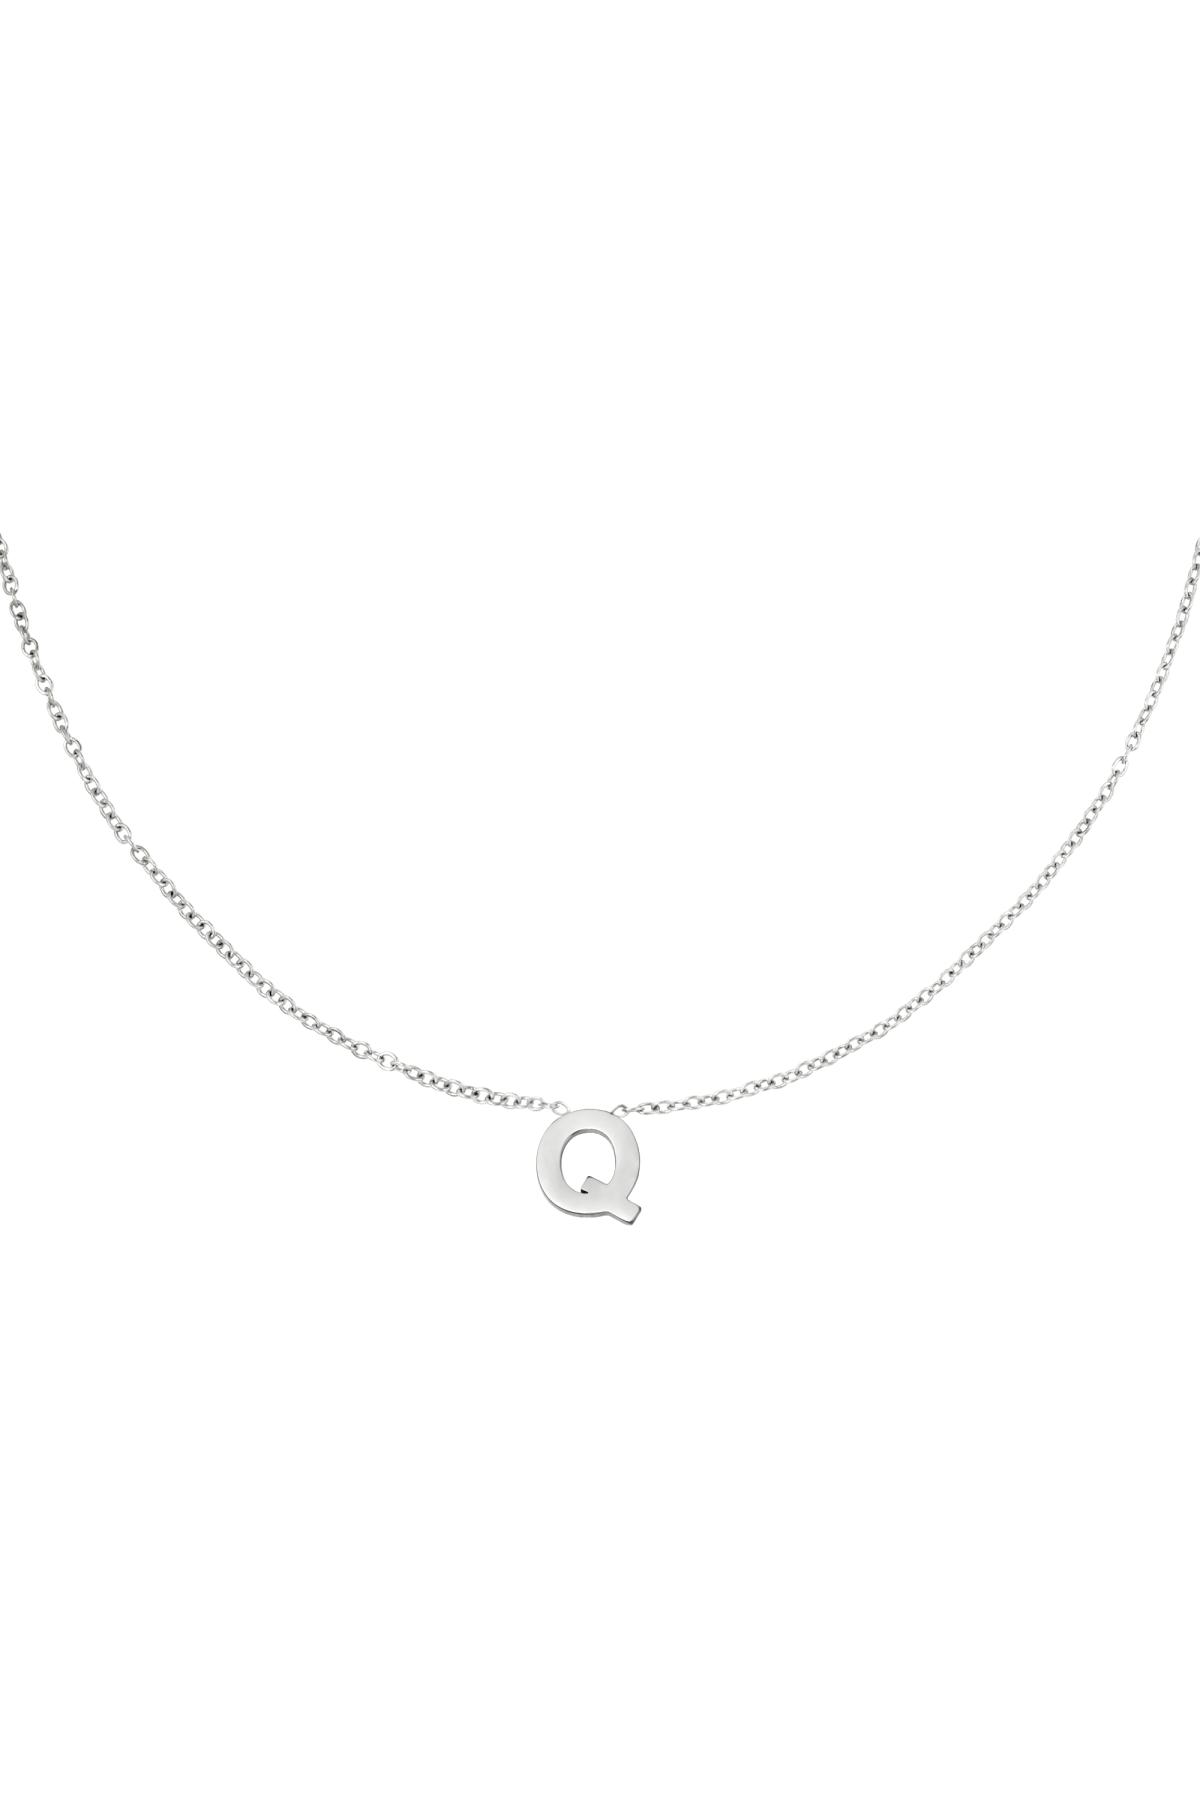 Silver / Stainless steel necklace initial Q Silver Picture15